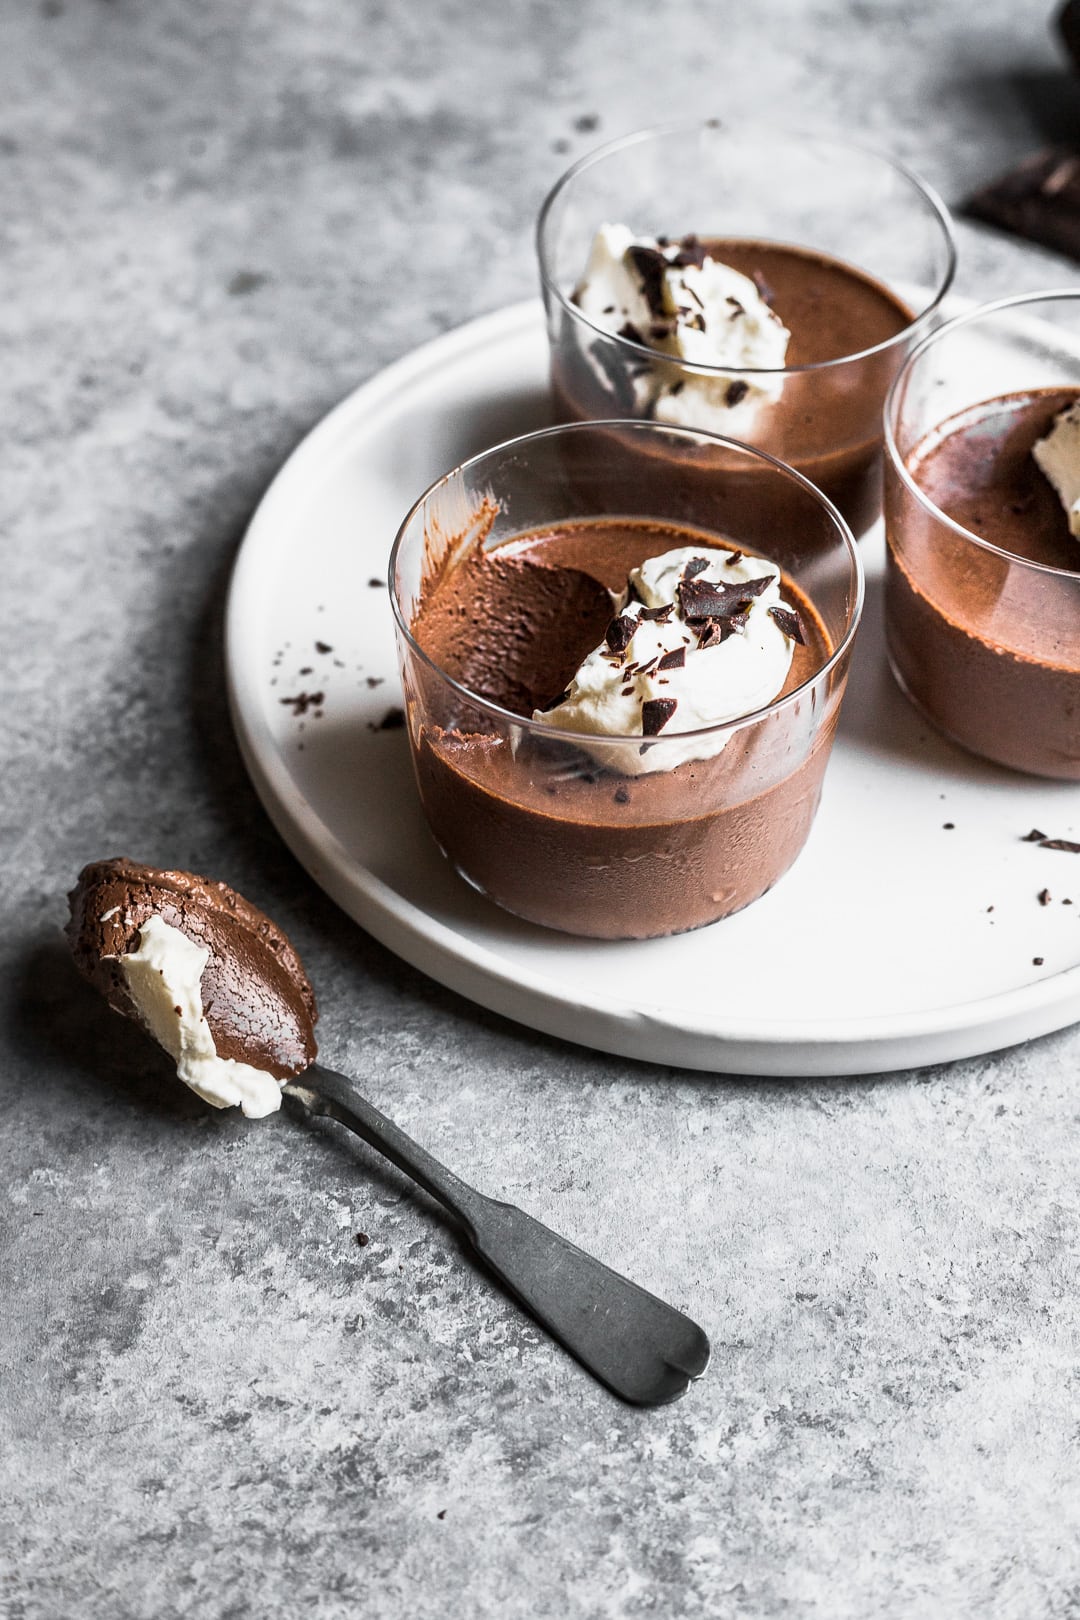 Chocolate dessert in glasses on a white plate and grey background with a spoon resting nearby